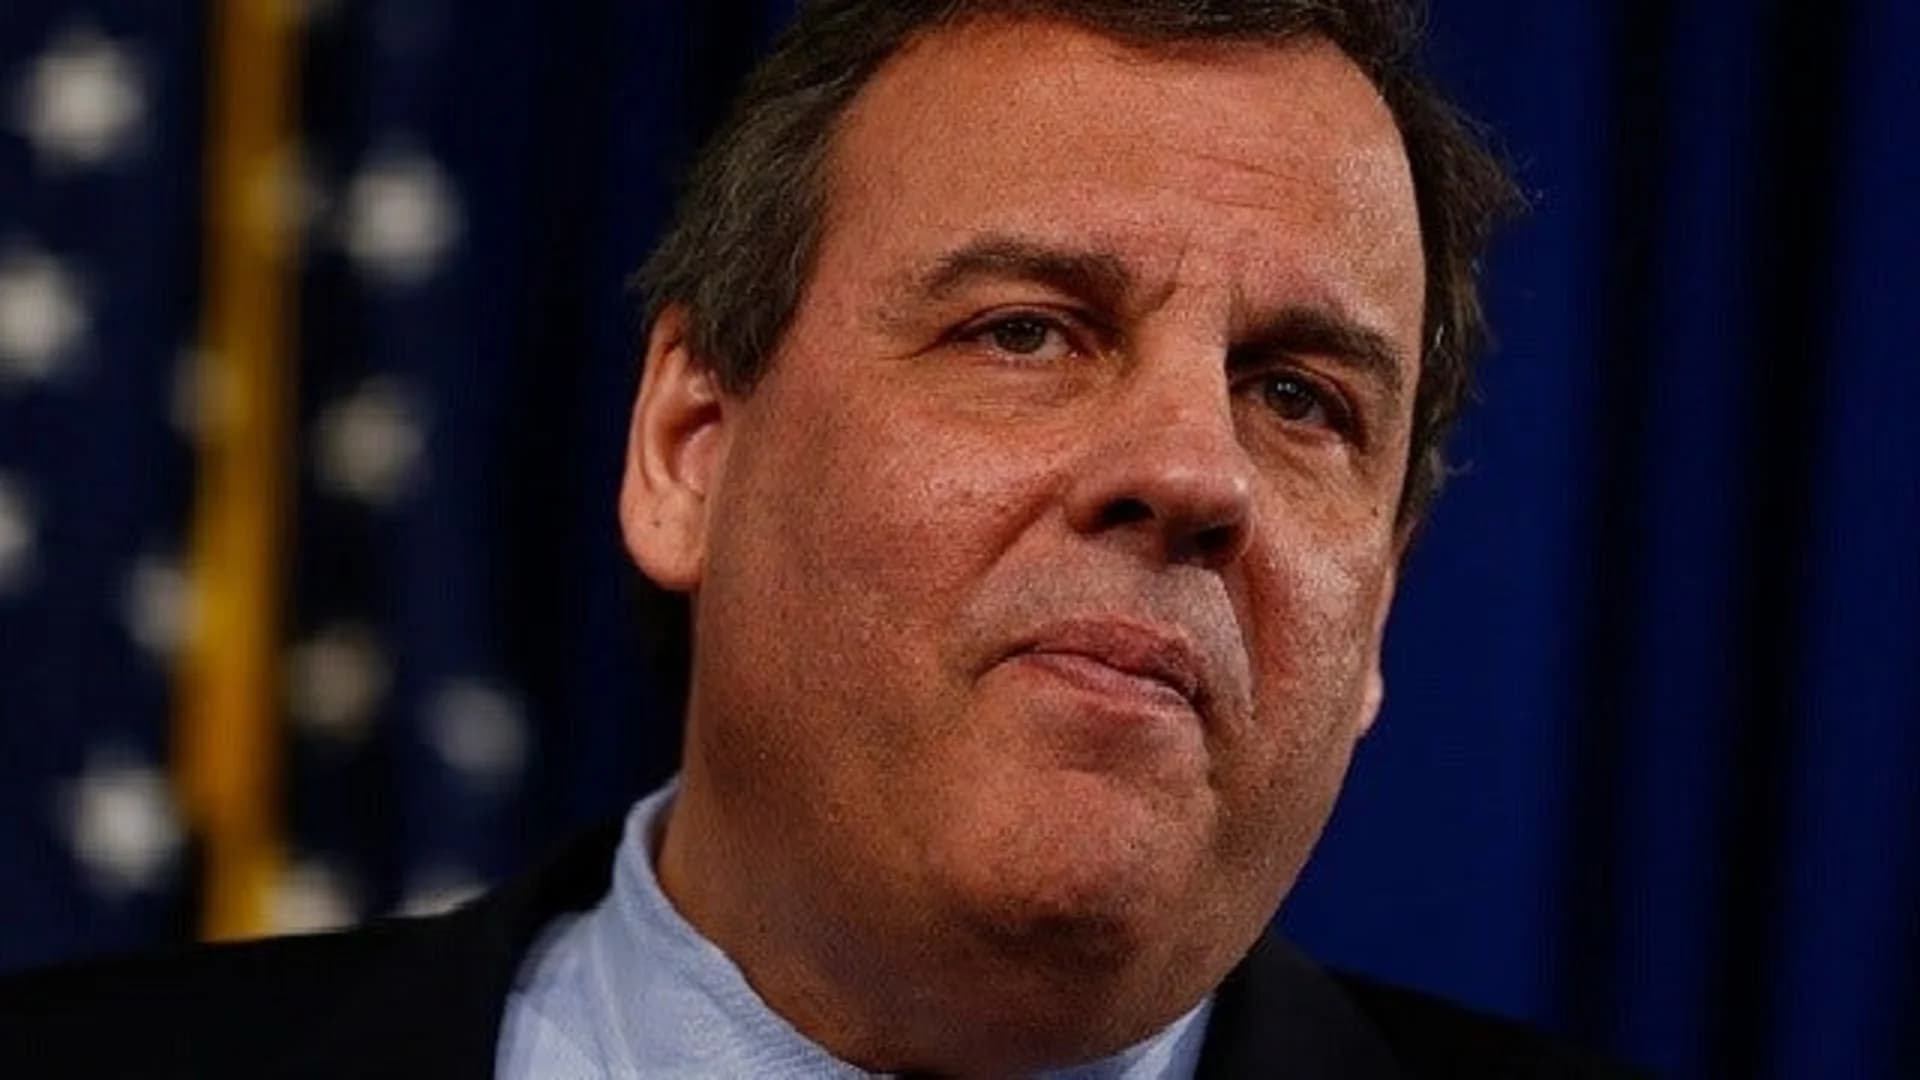 Poll: Christie leaves as New Jersey’s most unpopular governor